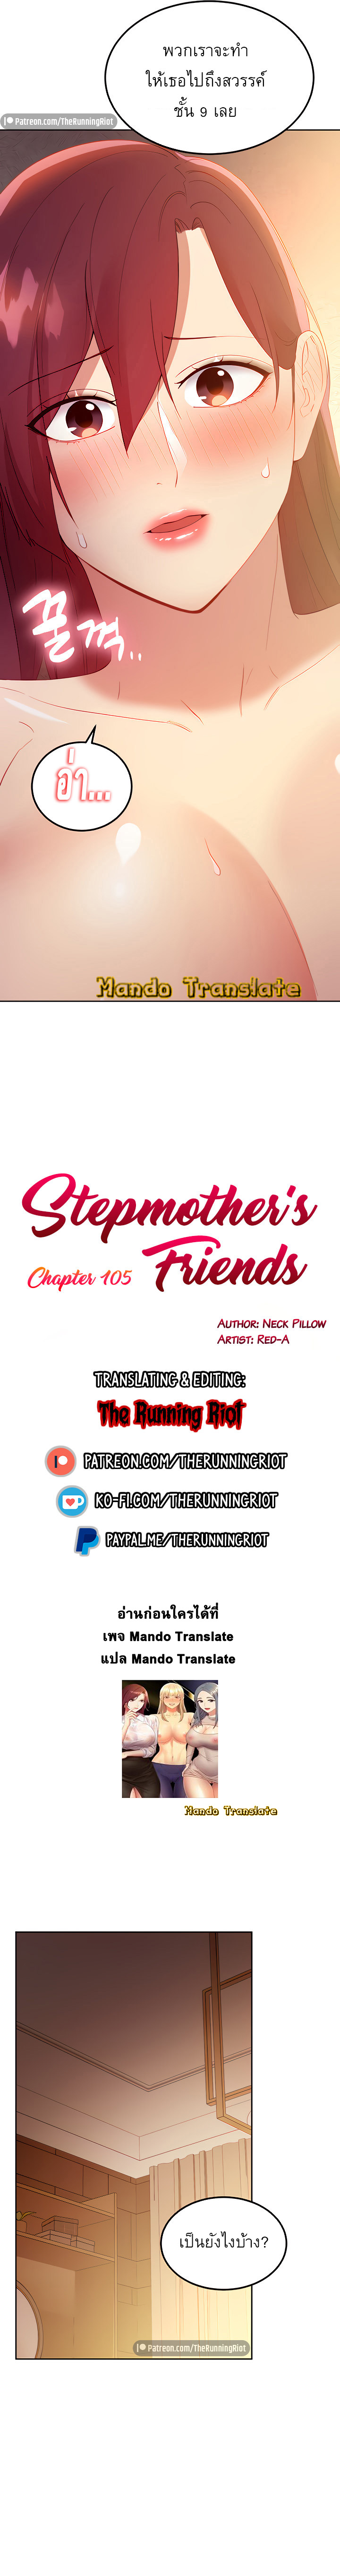 Stepmother’s Friends 105 01